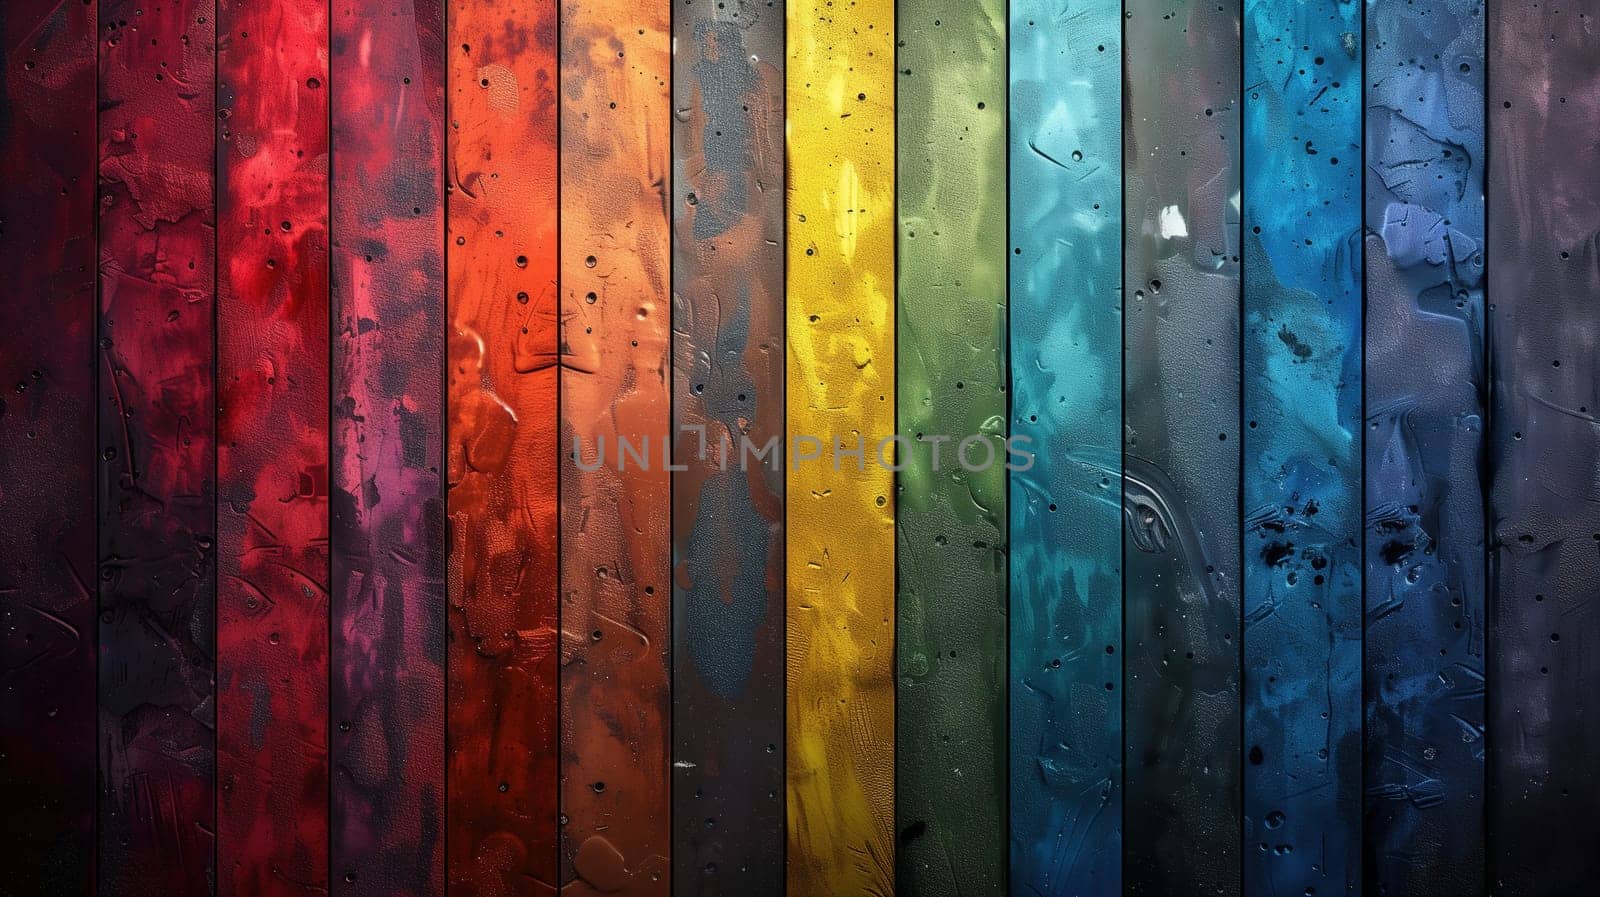 A vibrant rainbow-colored wallpaper adorned with glistening drops of water, creating a visually striking and colorful composition.